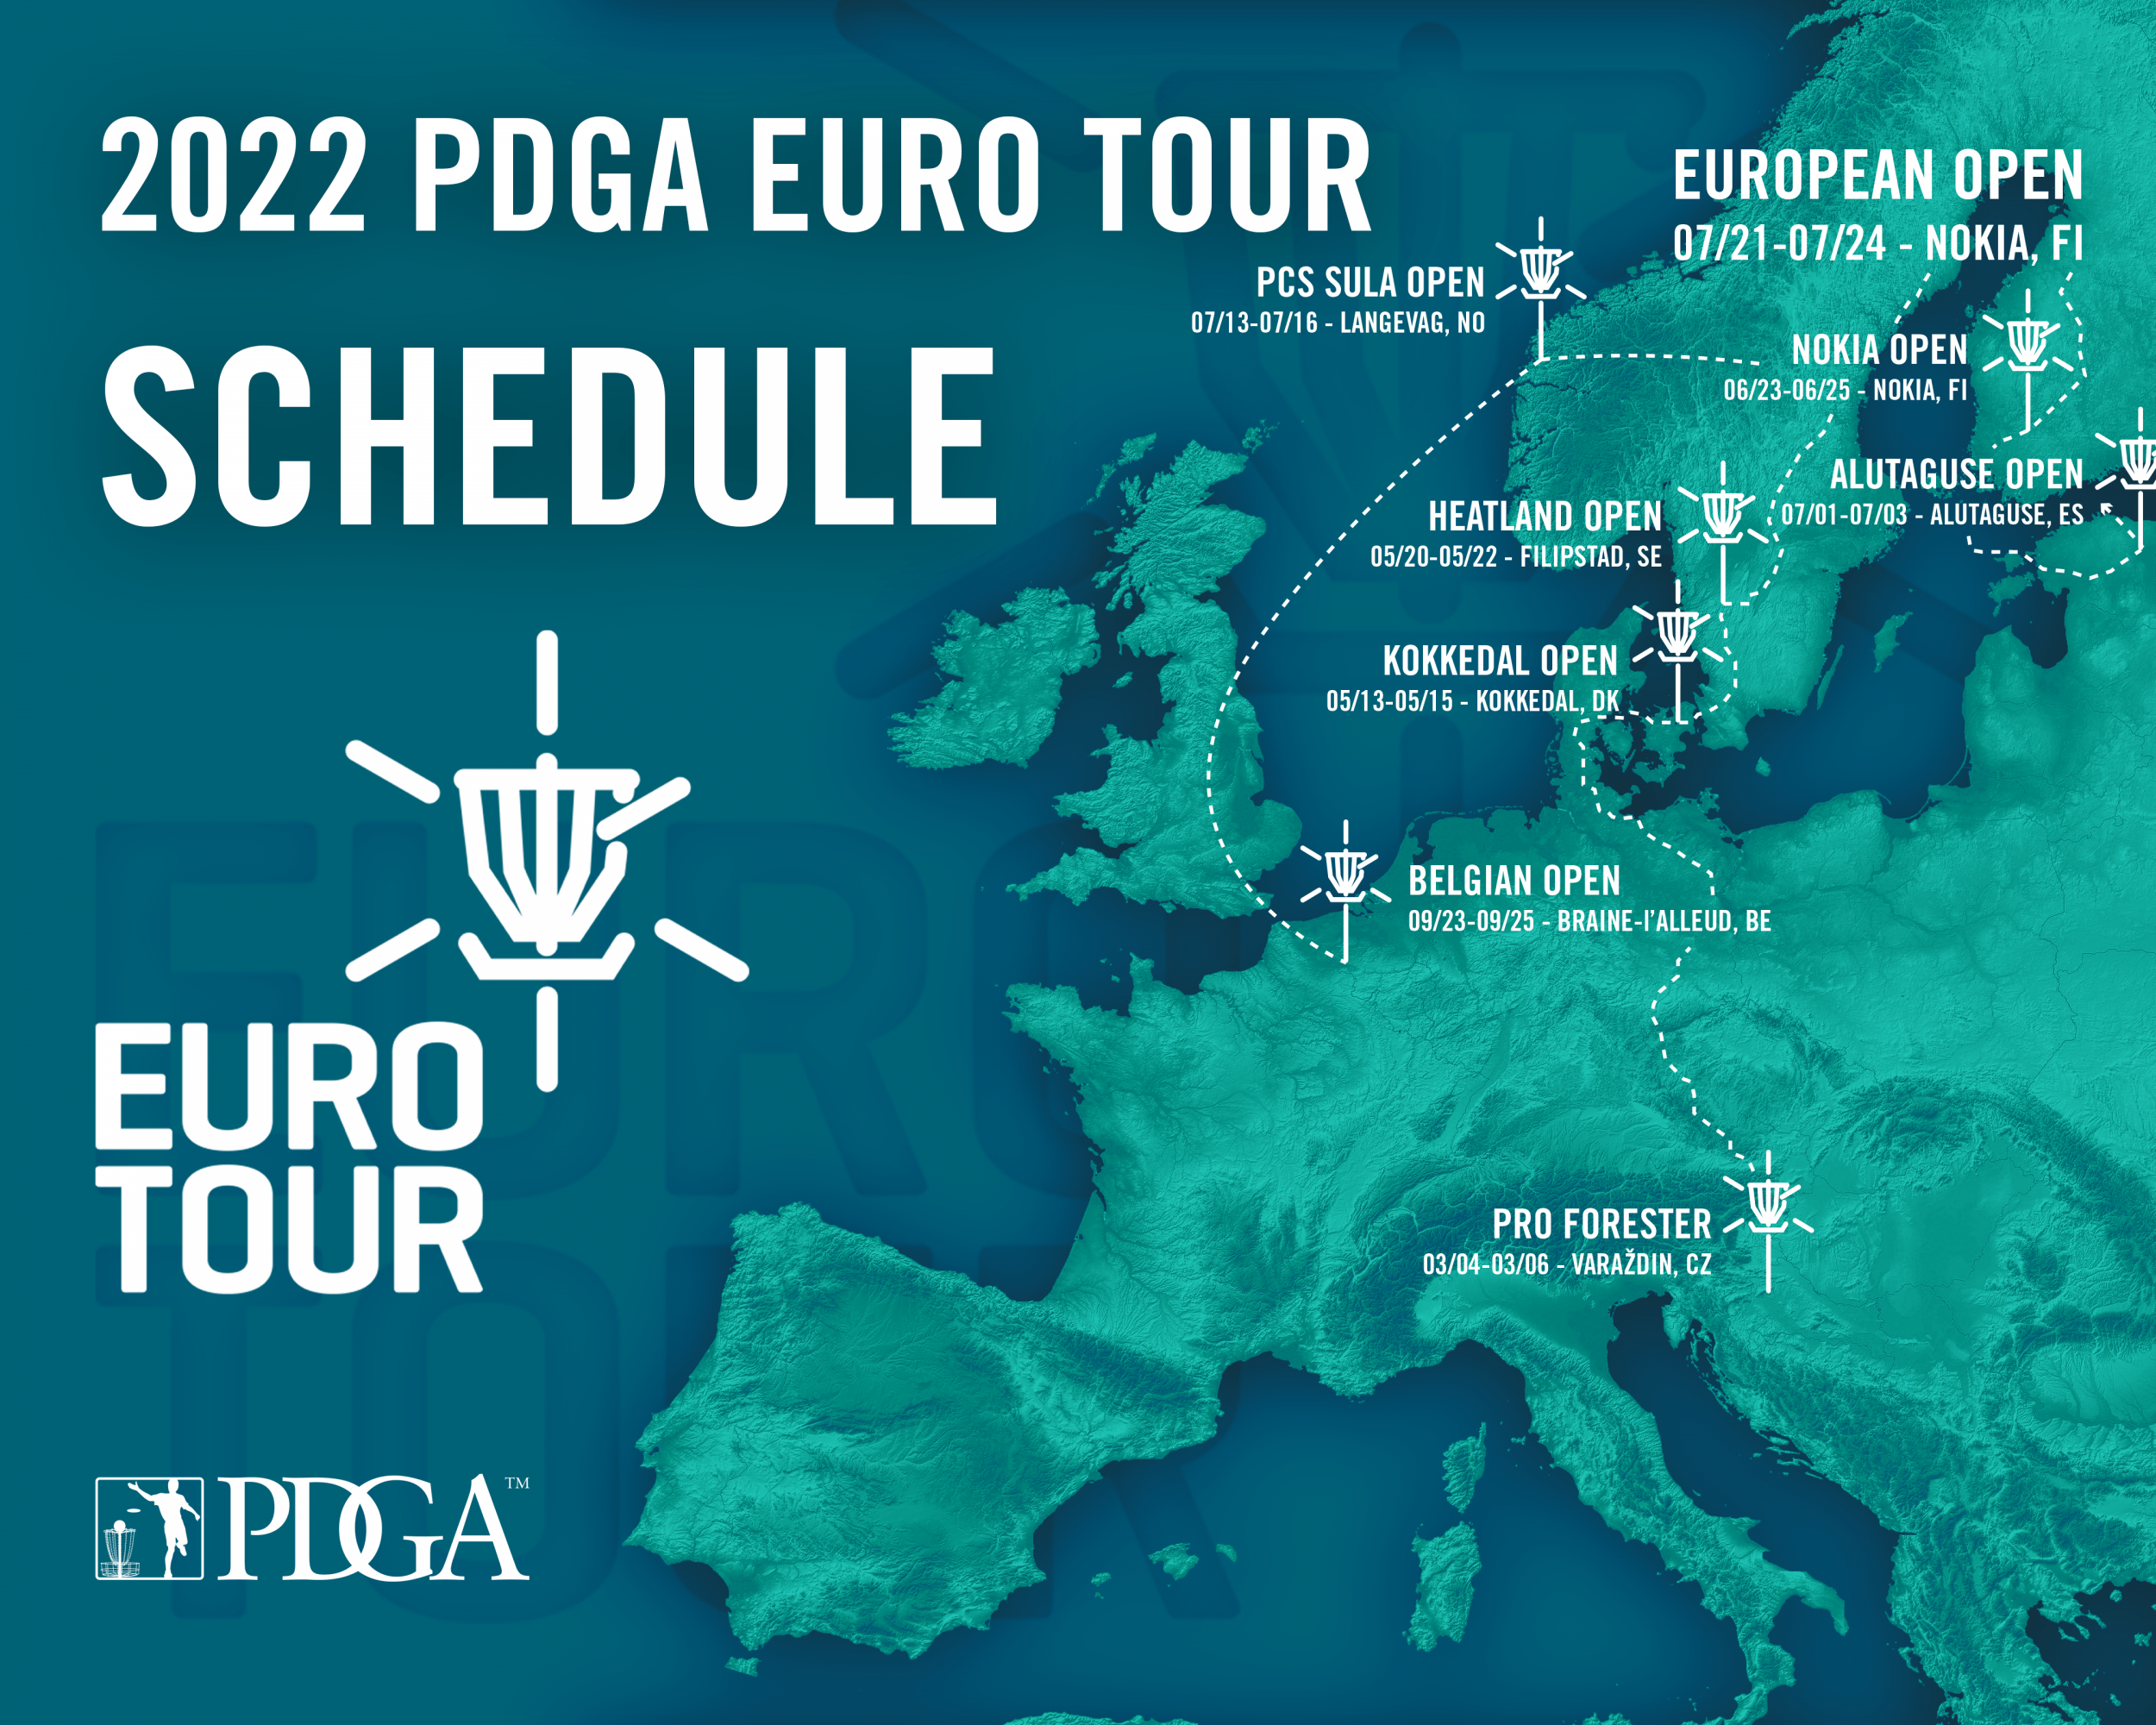 European Tour prepares for ambitious tournament schedule in 2021, Golf  News and Tour Information